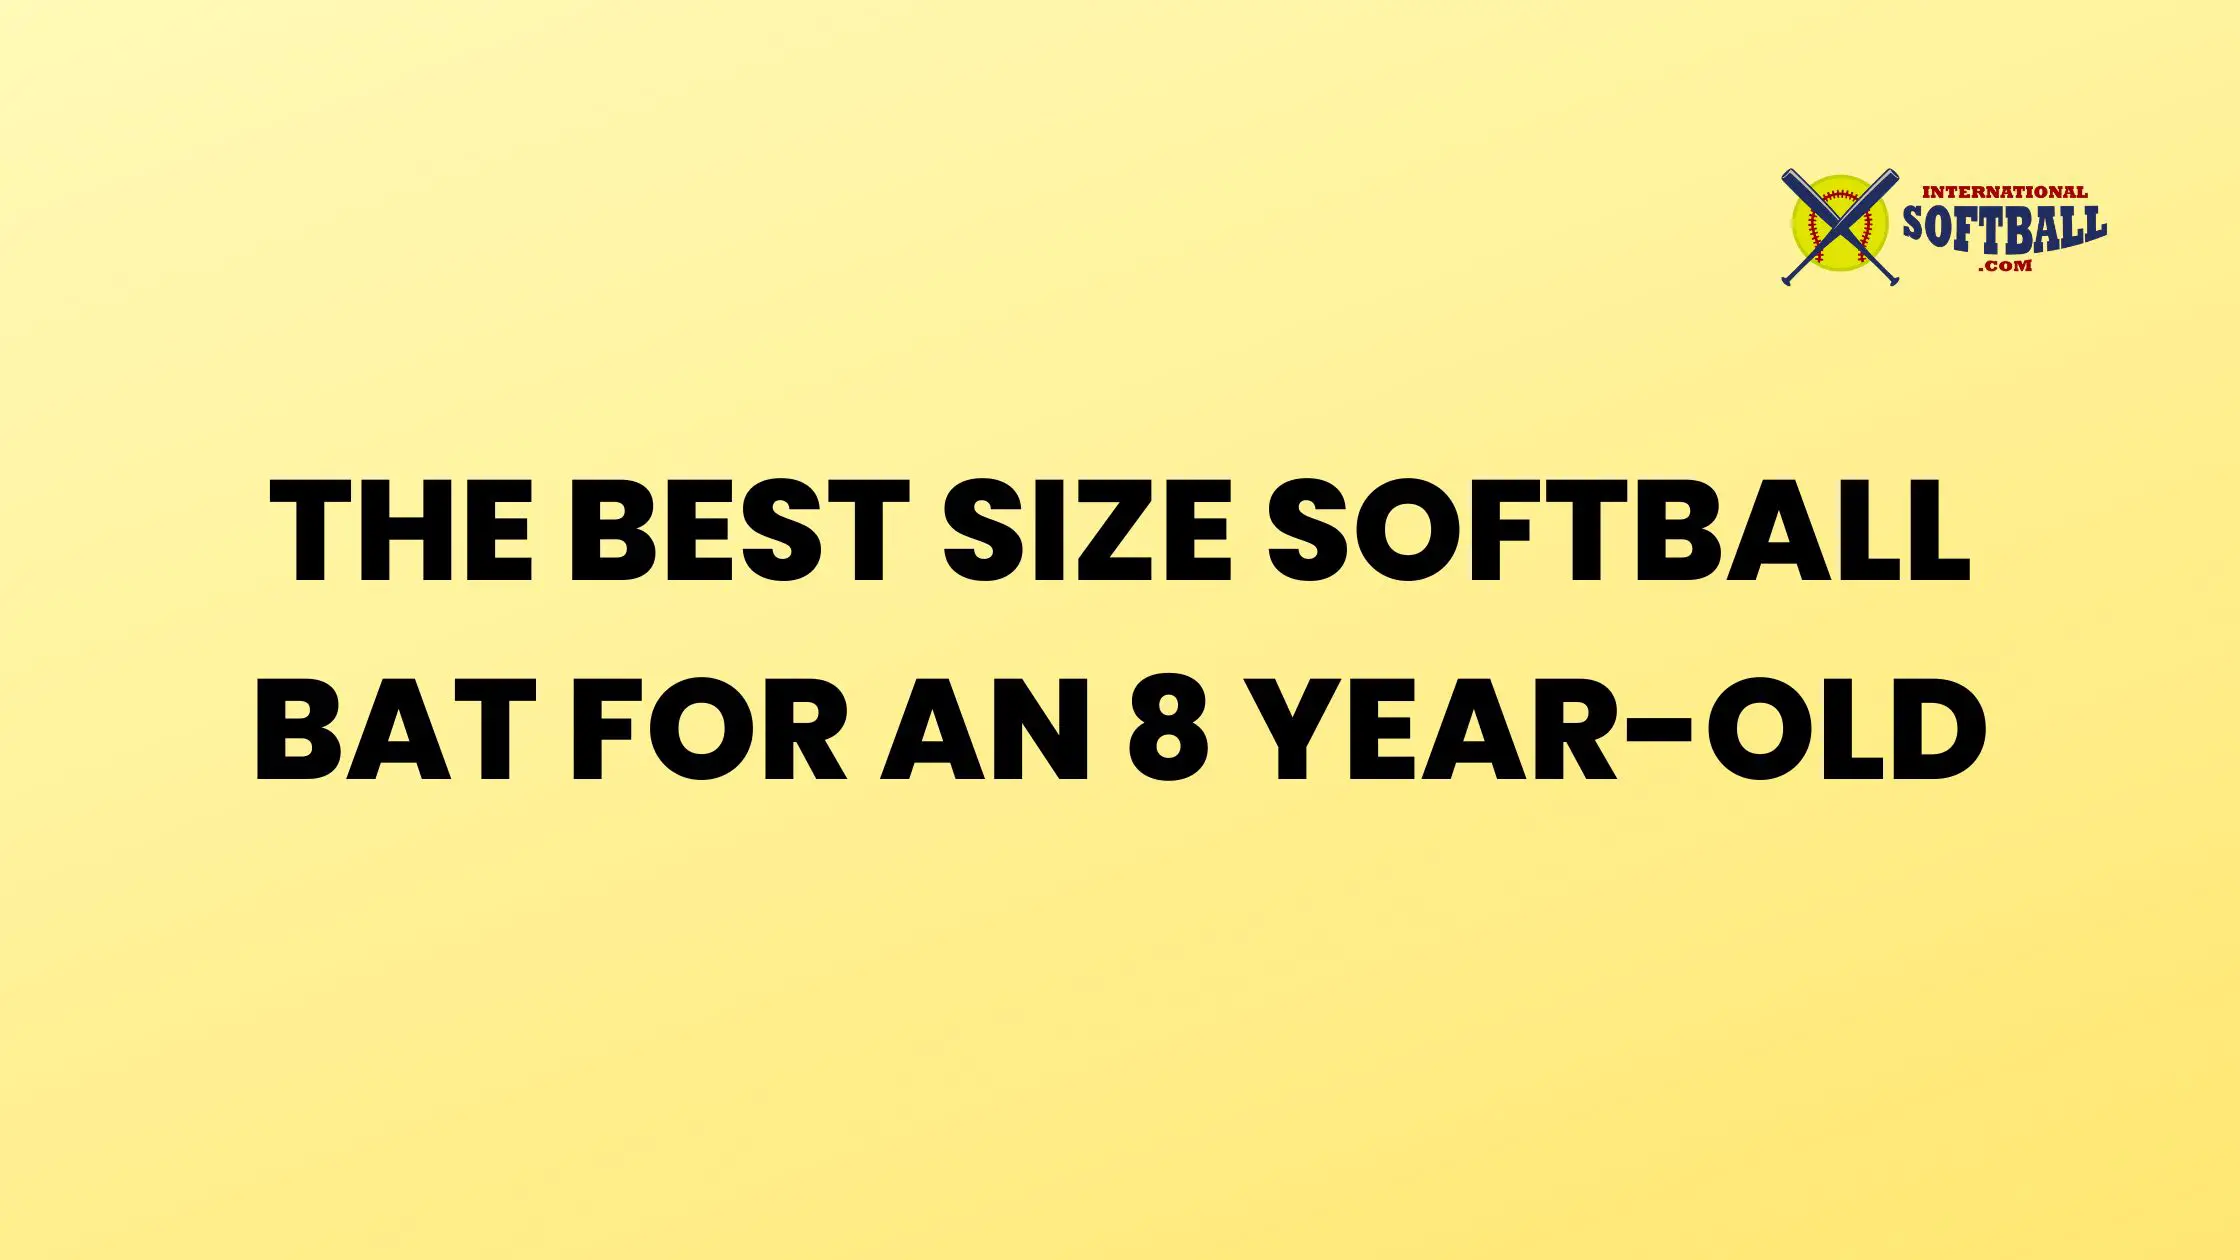 THE BEST SIZE SOFTBALL BAT FOR AN 8 YEAR-OLD